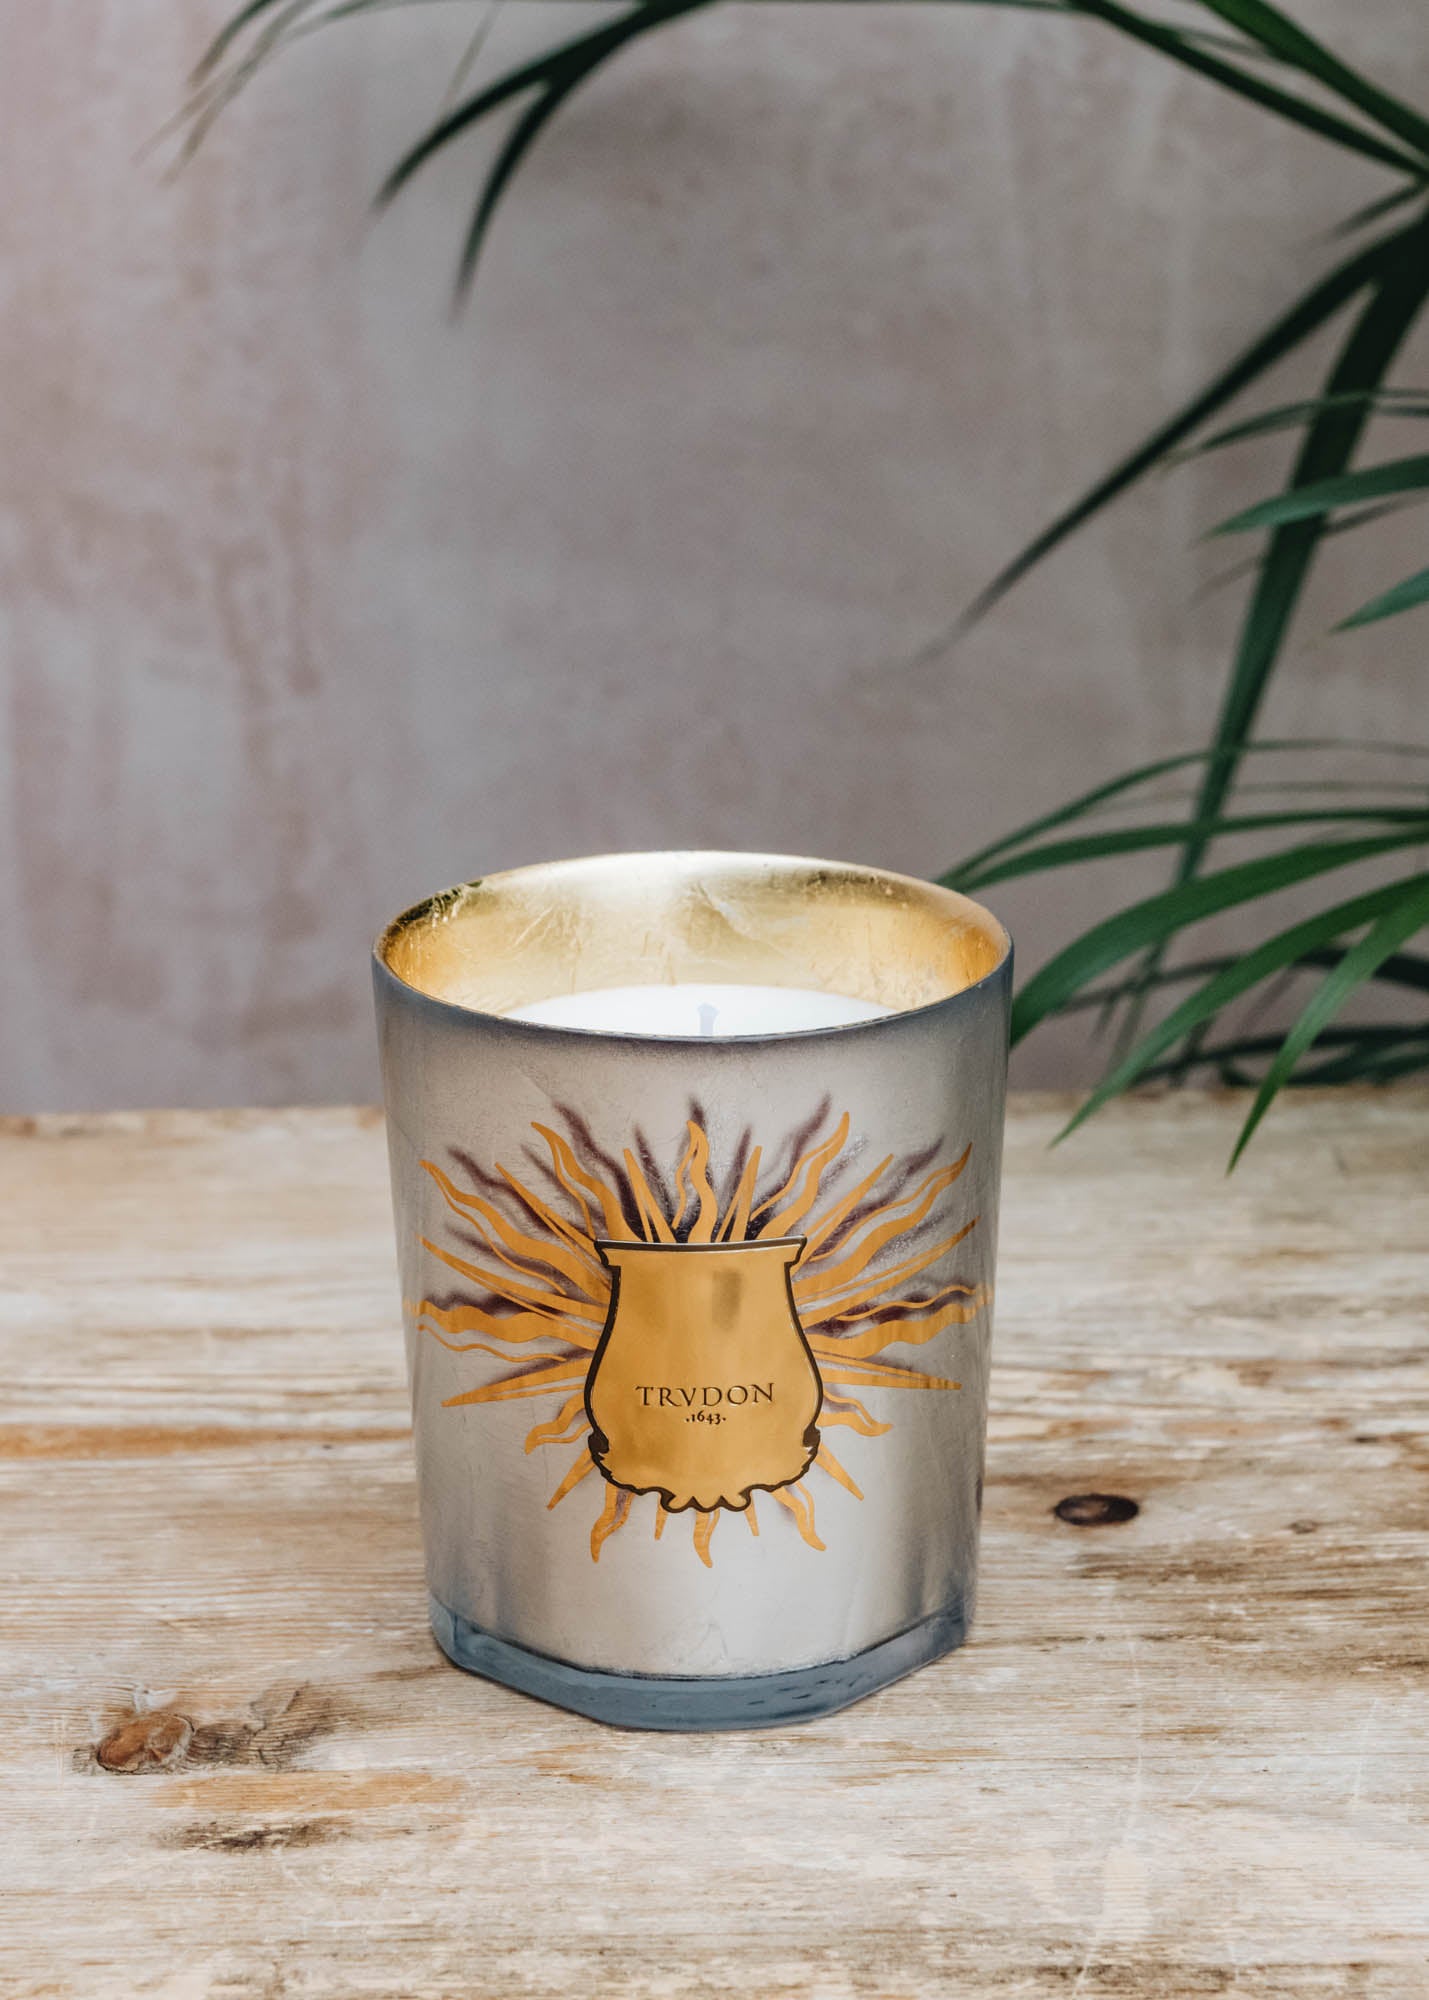 Trudon Altair Classic Astral Candle | Burford Garden Co.